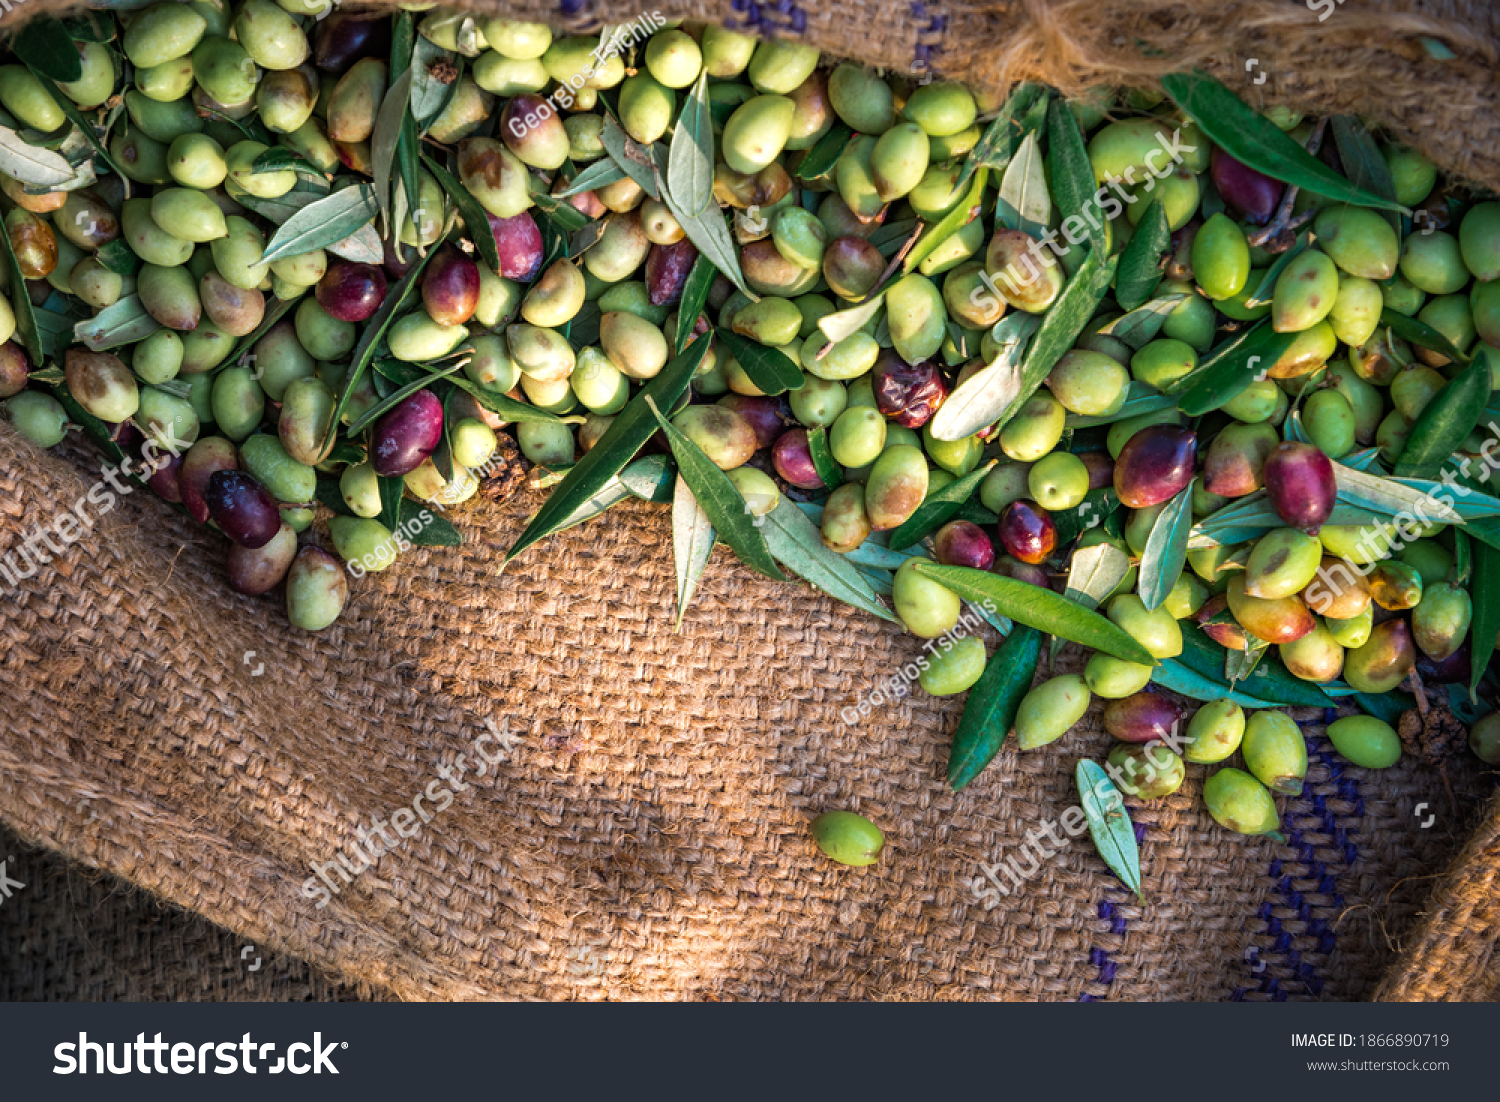 Harvested fresh olives in sacks in a field in Crete, Greece for olive oil production. #1866890719